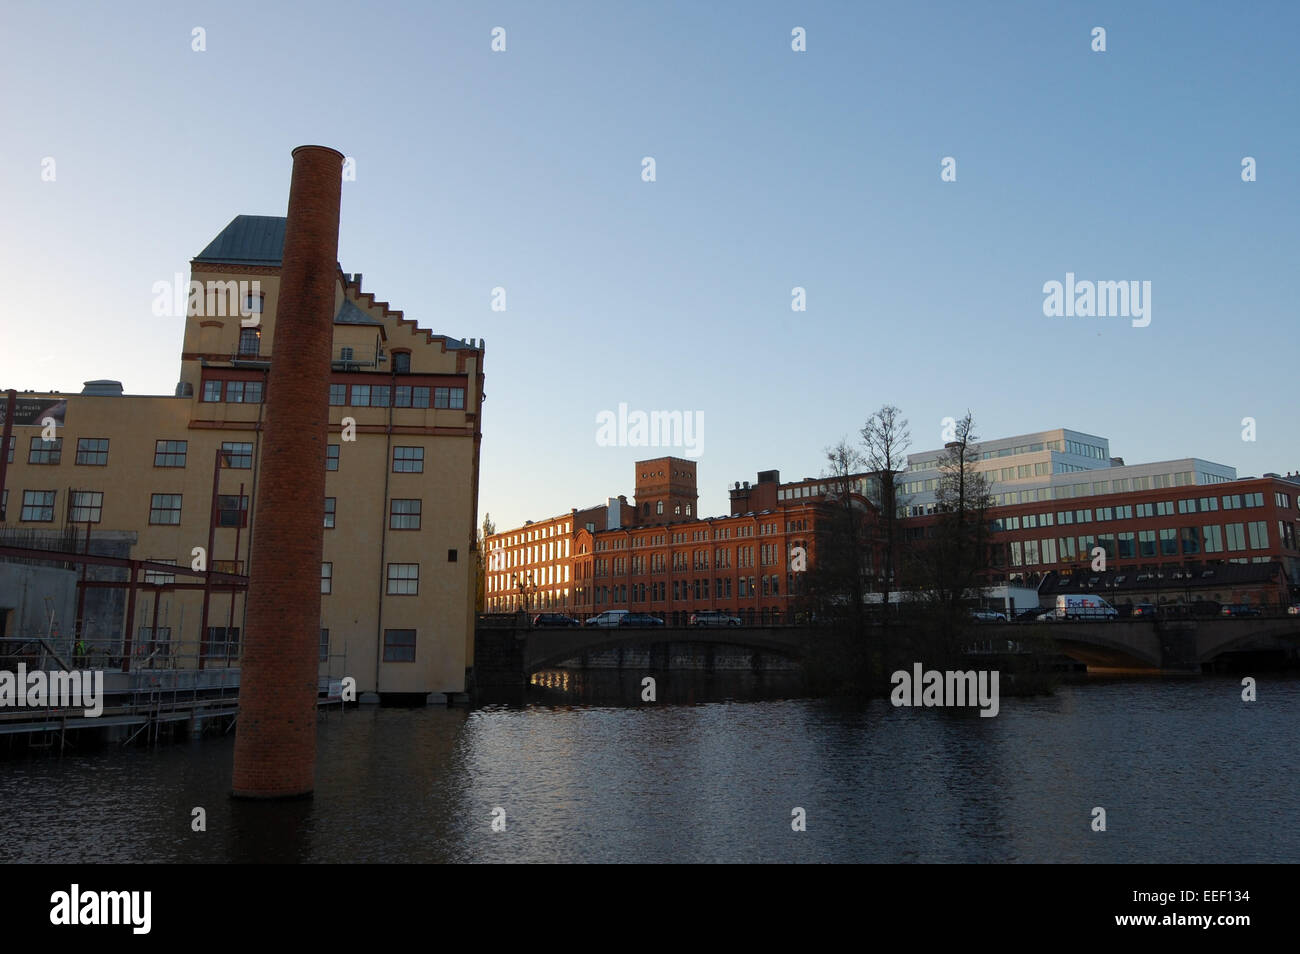 'The Fifth chimney' by Jan Svenungsson Norrköping Sweden Stock Photo